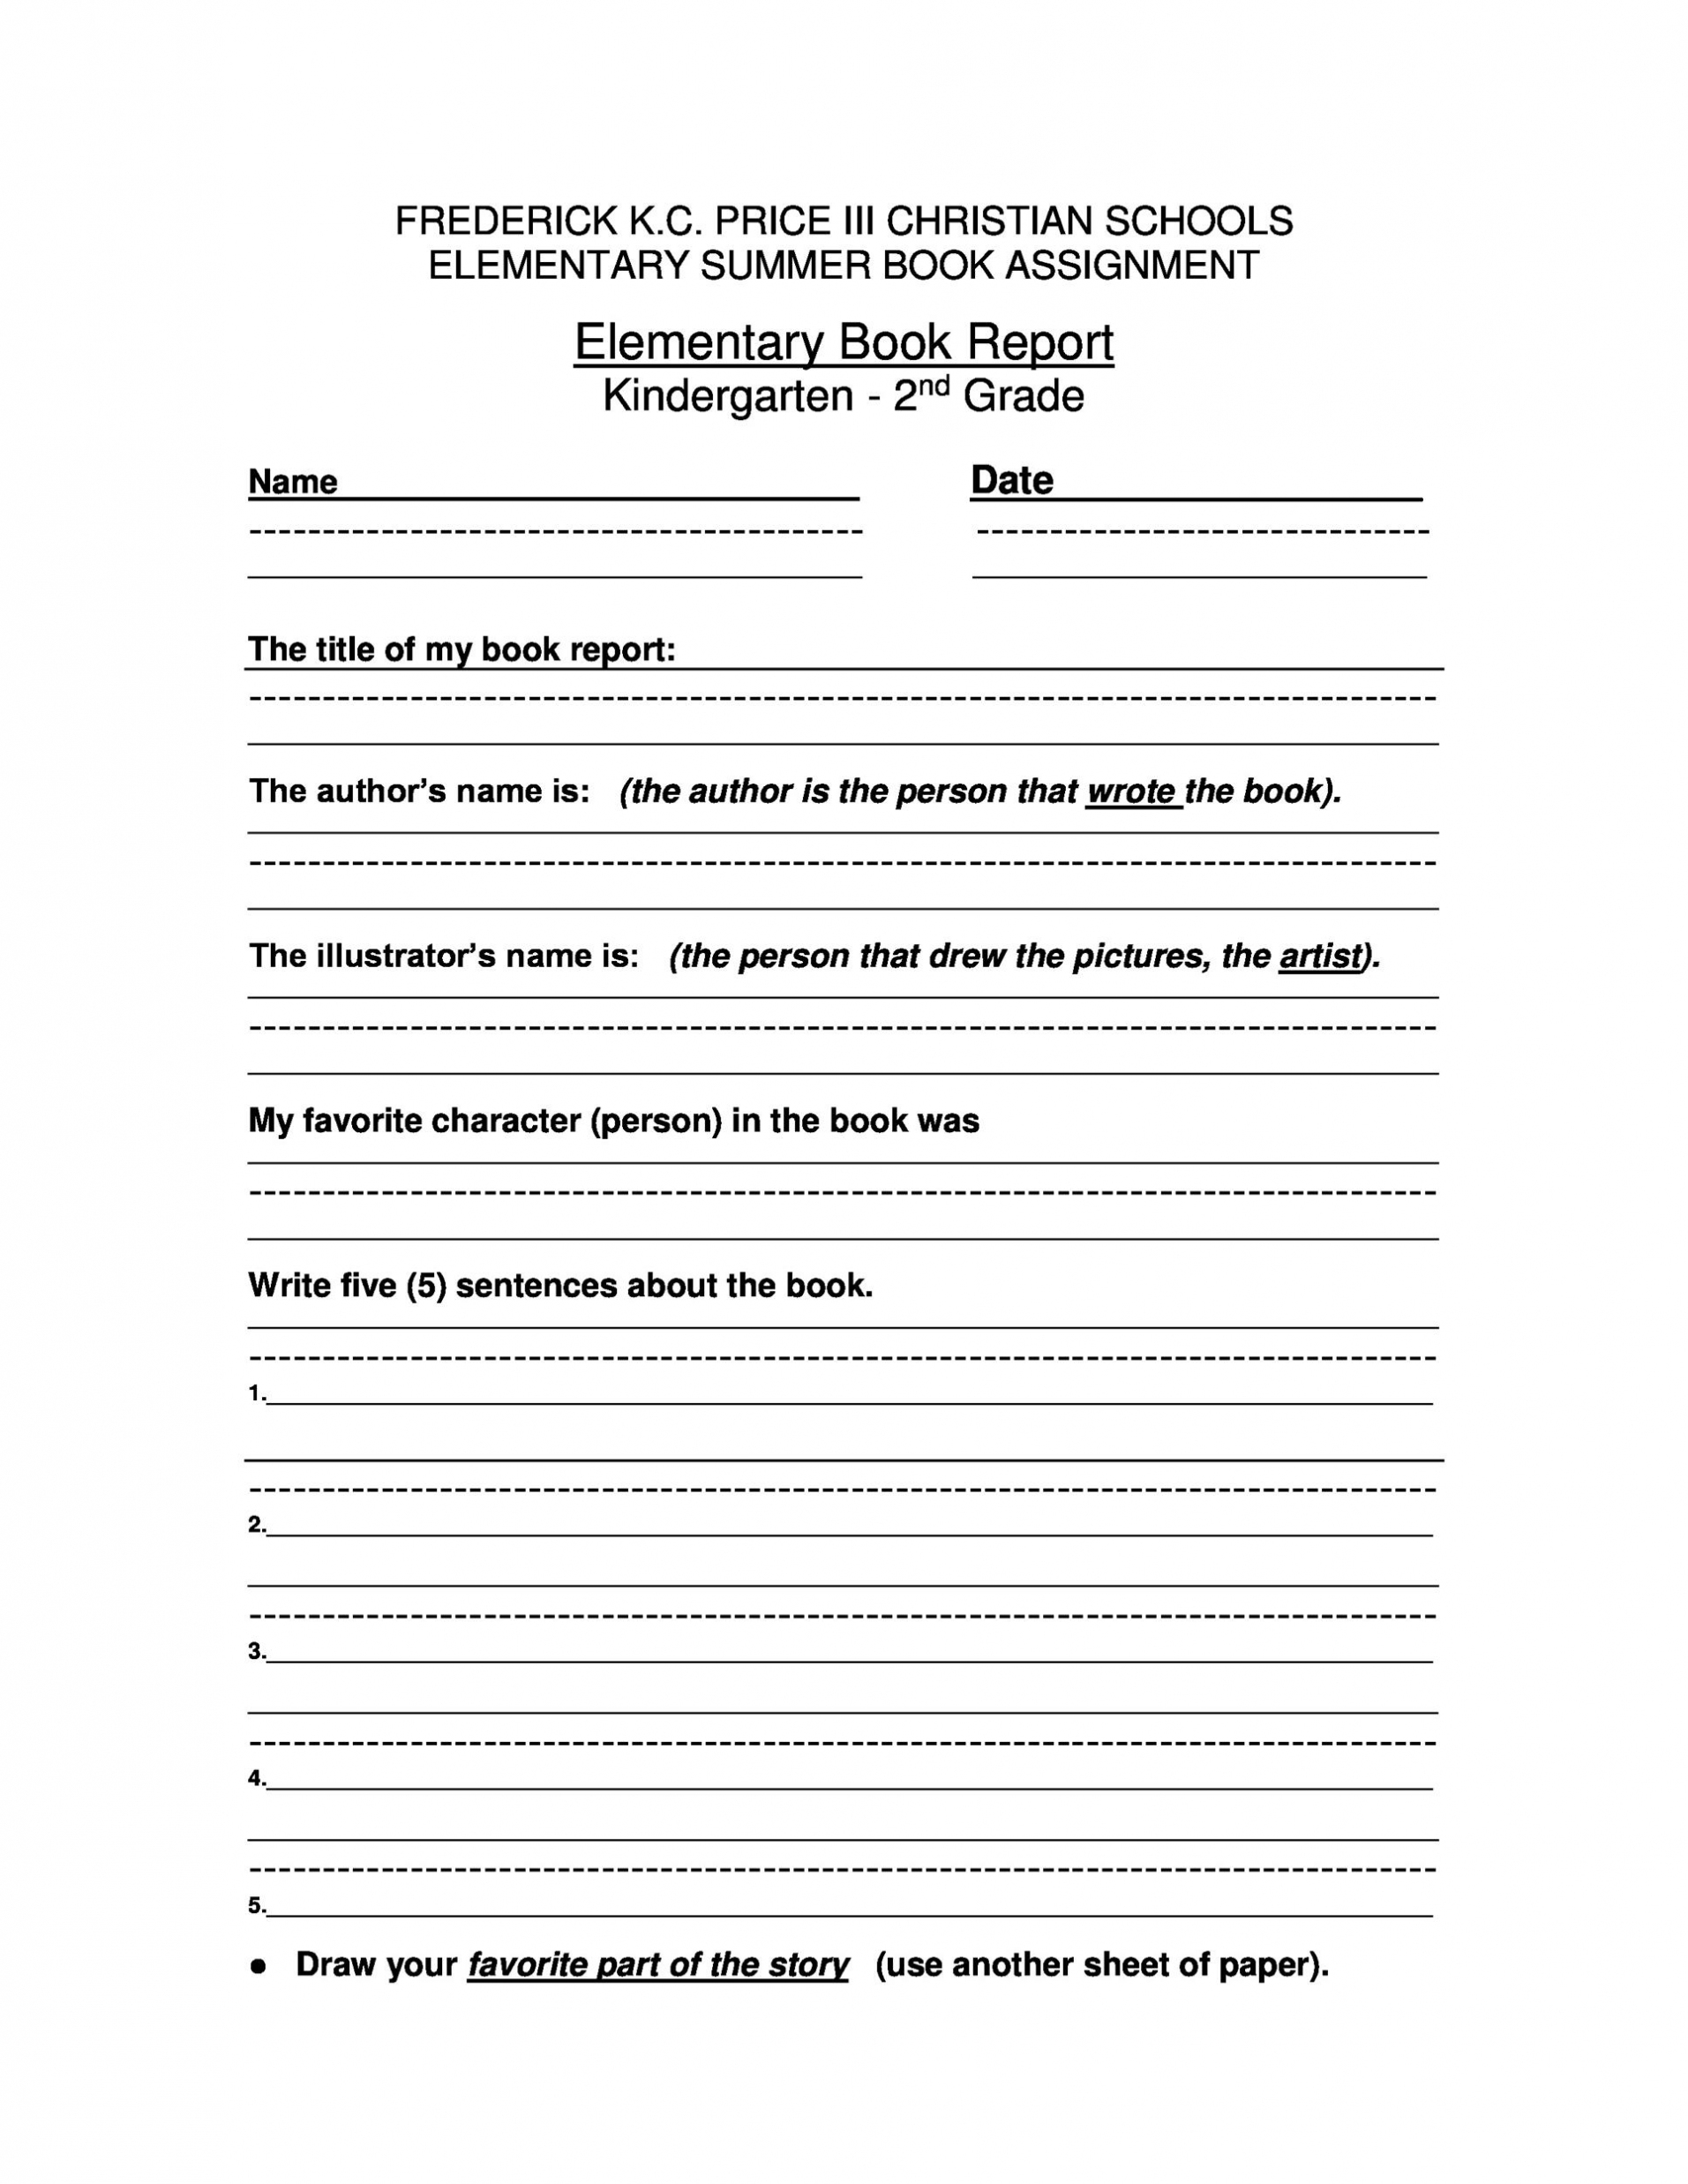 what-5-teach-me-simple-book-report-for-kids